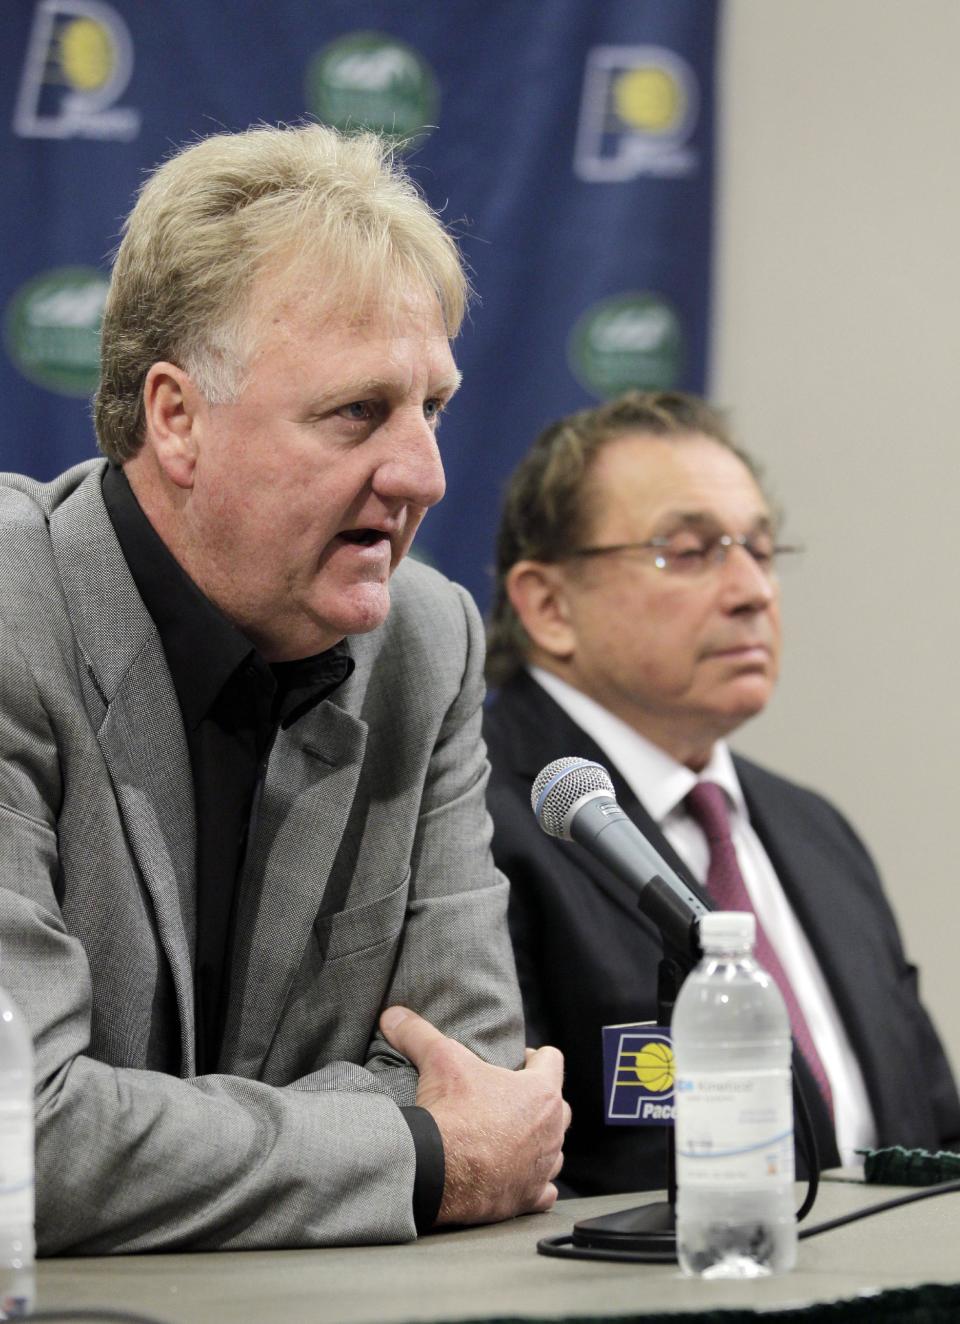 Larry Bird, left, talks about stepping down as president of the Indiana Pacers as team owner Herb Simon listens during an announcement by the NBA basketball team in Indianapolis, Wednesday, June 27, 2012. Donnie Walsh was named as president and Kevin Pritchard as general manager. (AP Photo/Michael Conroy)